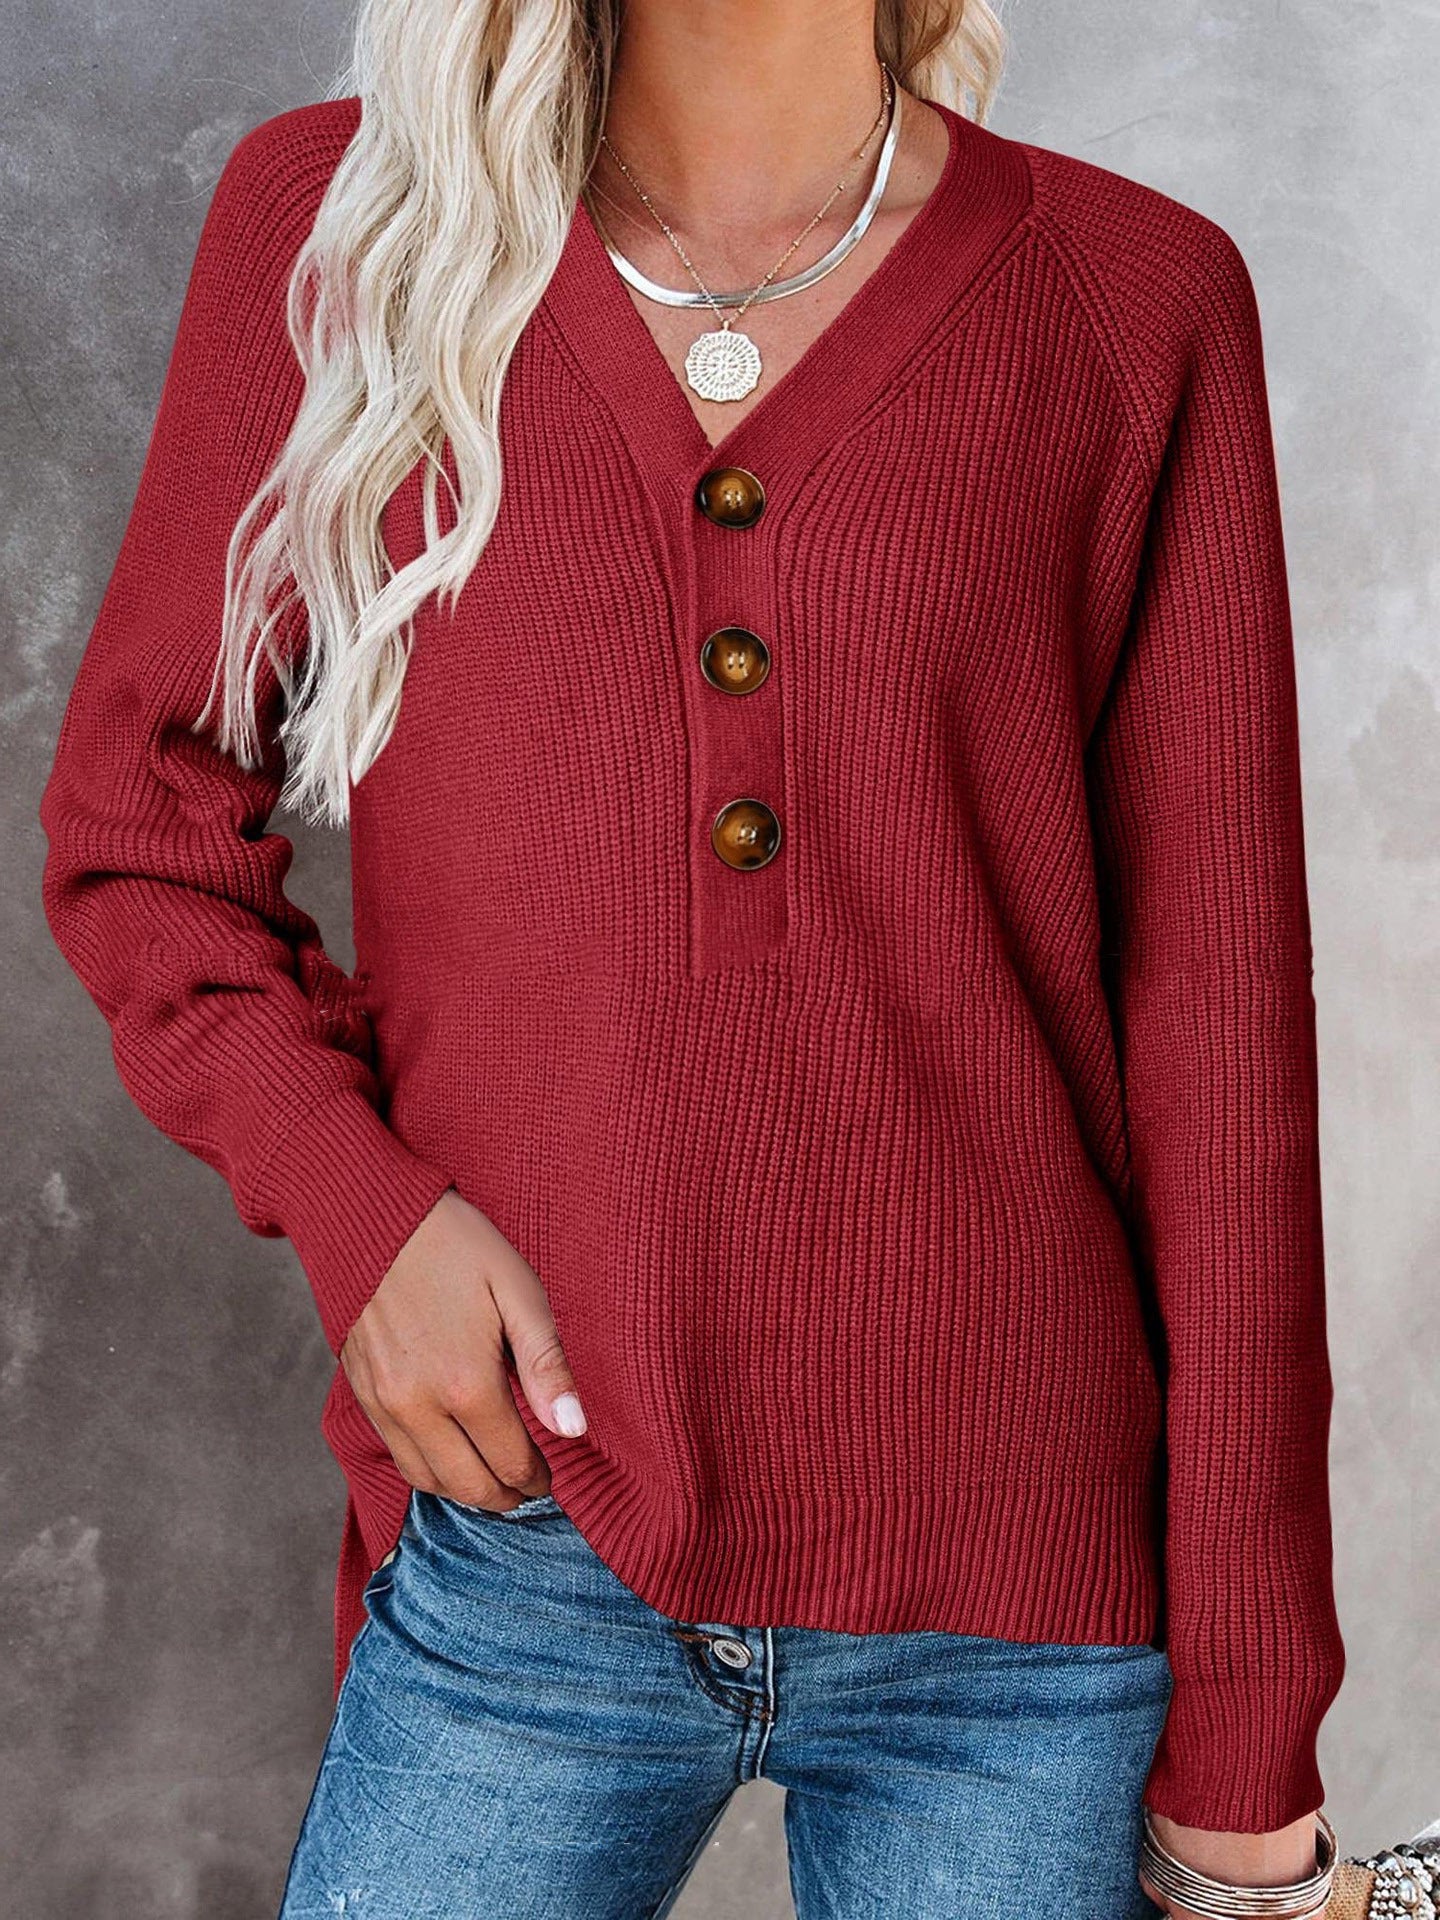 New Button New Knitted V-neck Sweater Women